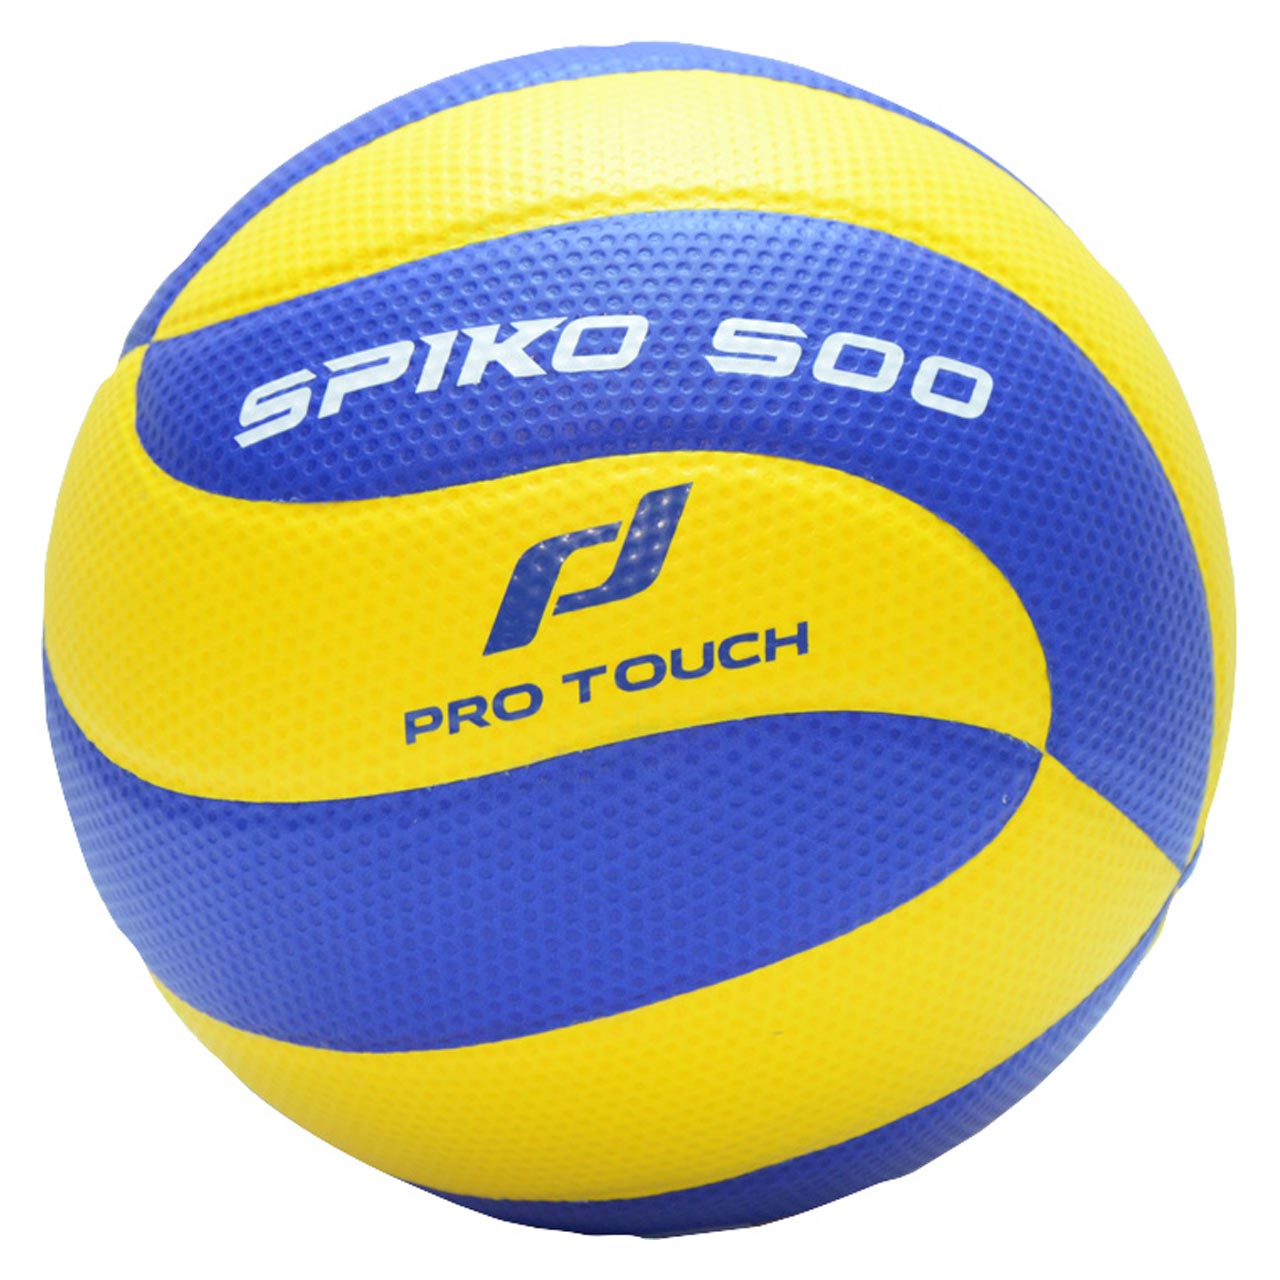 Volleyball Spiko 500